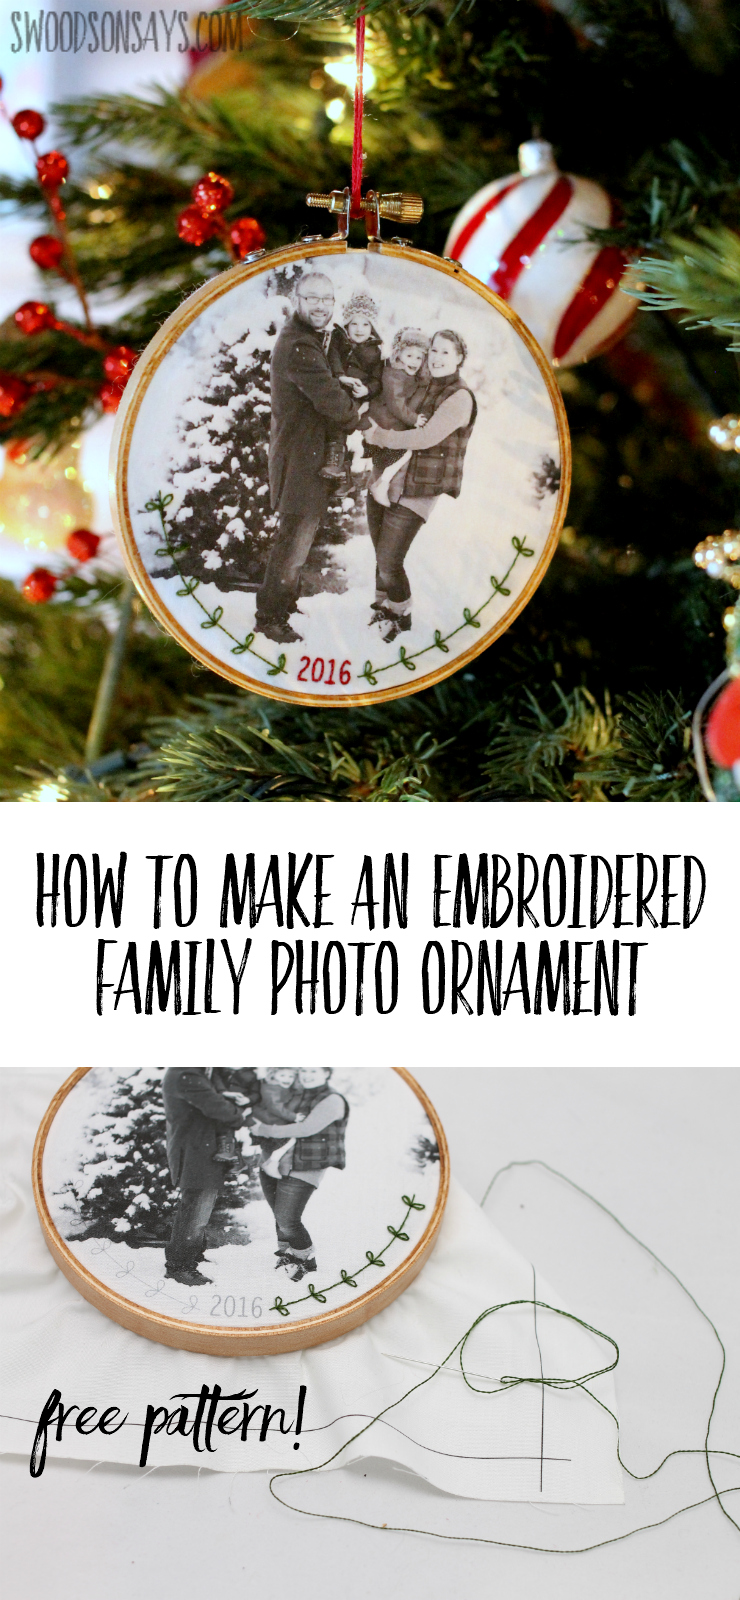 Personalized DIY Christmas ornaments are so much fun to make, see how easy it is to stitch a flourish and the date on your family photo! A simple tutorial for how to make an embroidered family photo ornament for Christmas or wall decor. #diychristmas #diychristmasornament #embroidery